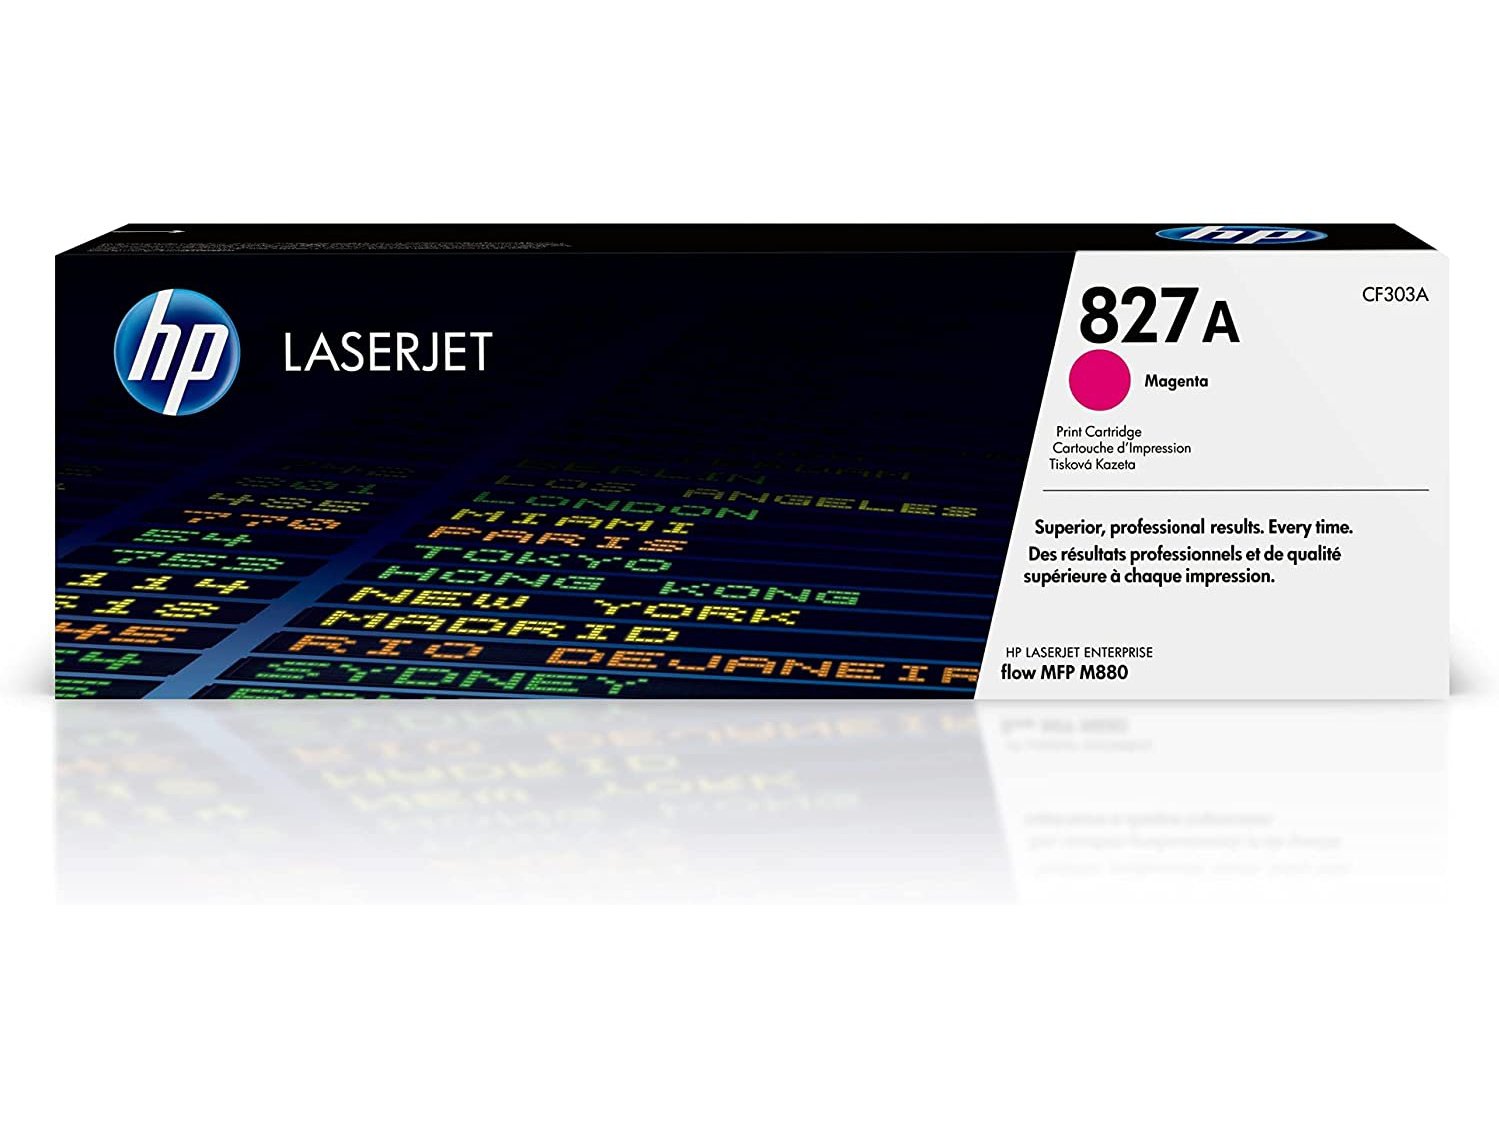 ICU Compatible/ OEM Get HP ICUCF303A Yields 32000 Pages 827A Magenta CF303A Laser Toner Cartridge - Ink Cartridges USA